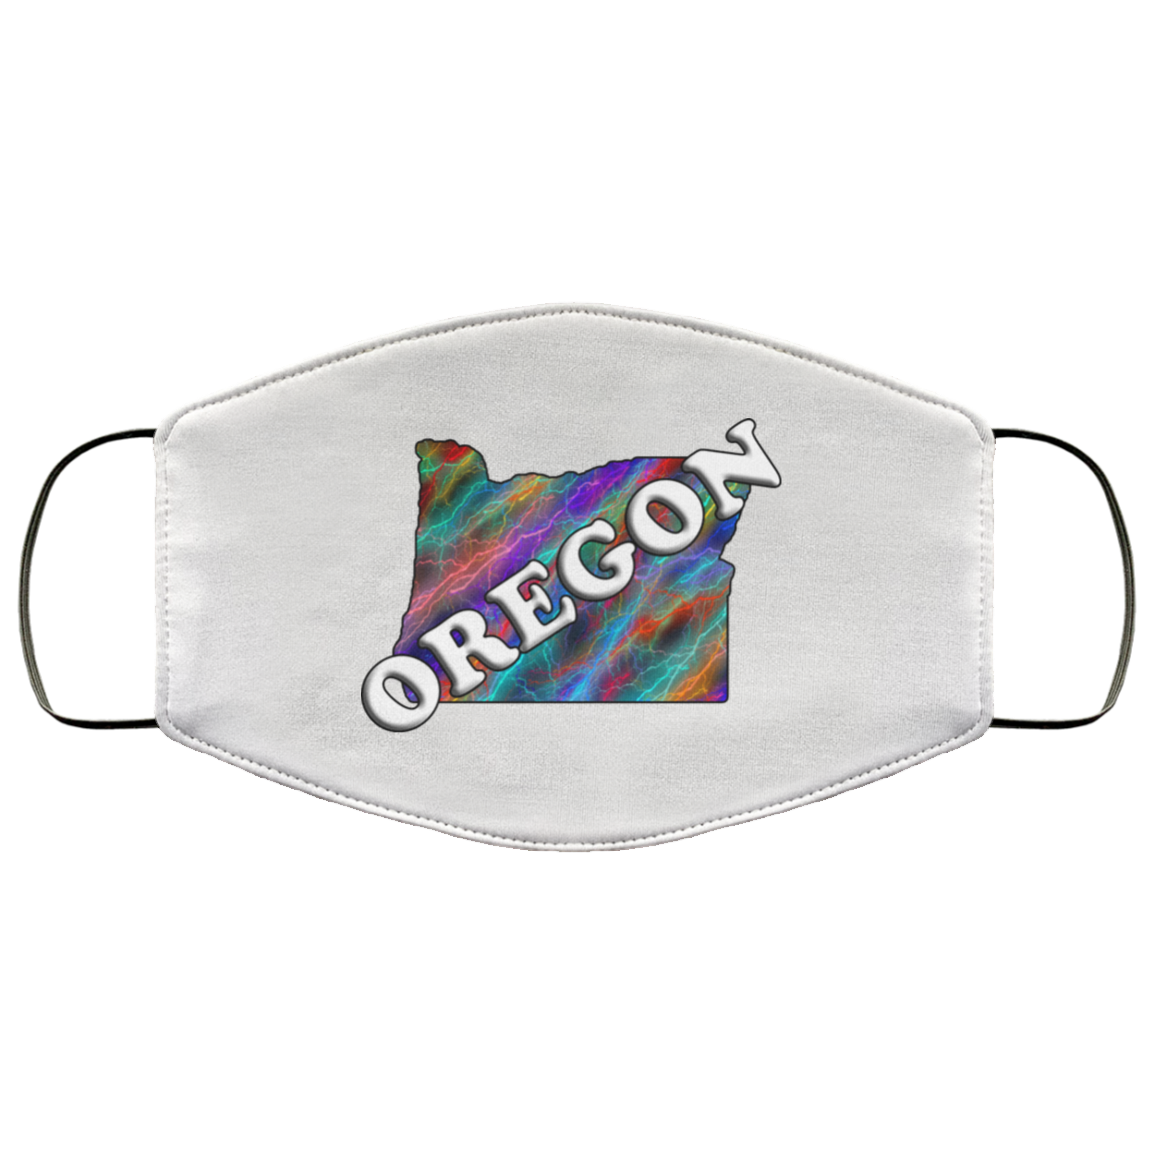 Oregon 2 Layer Protective Face Mask